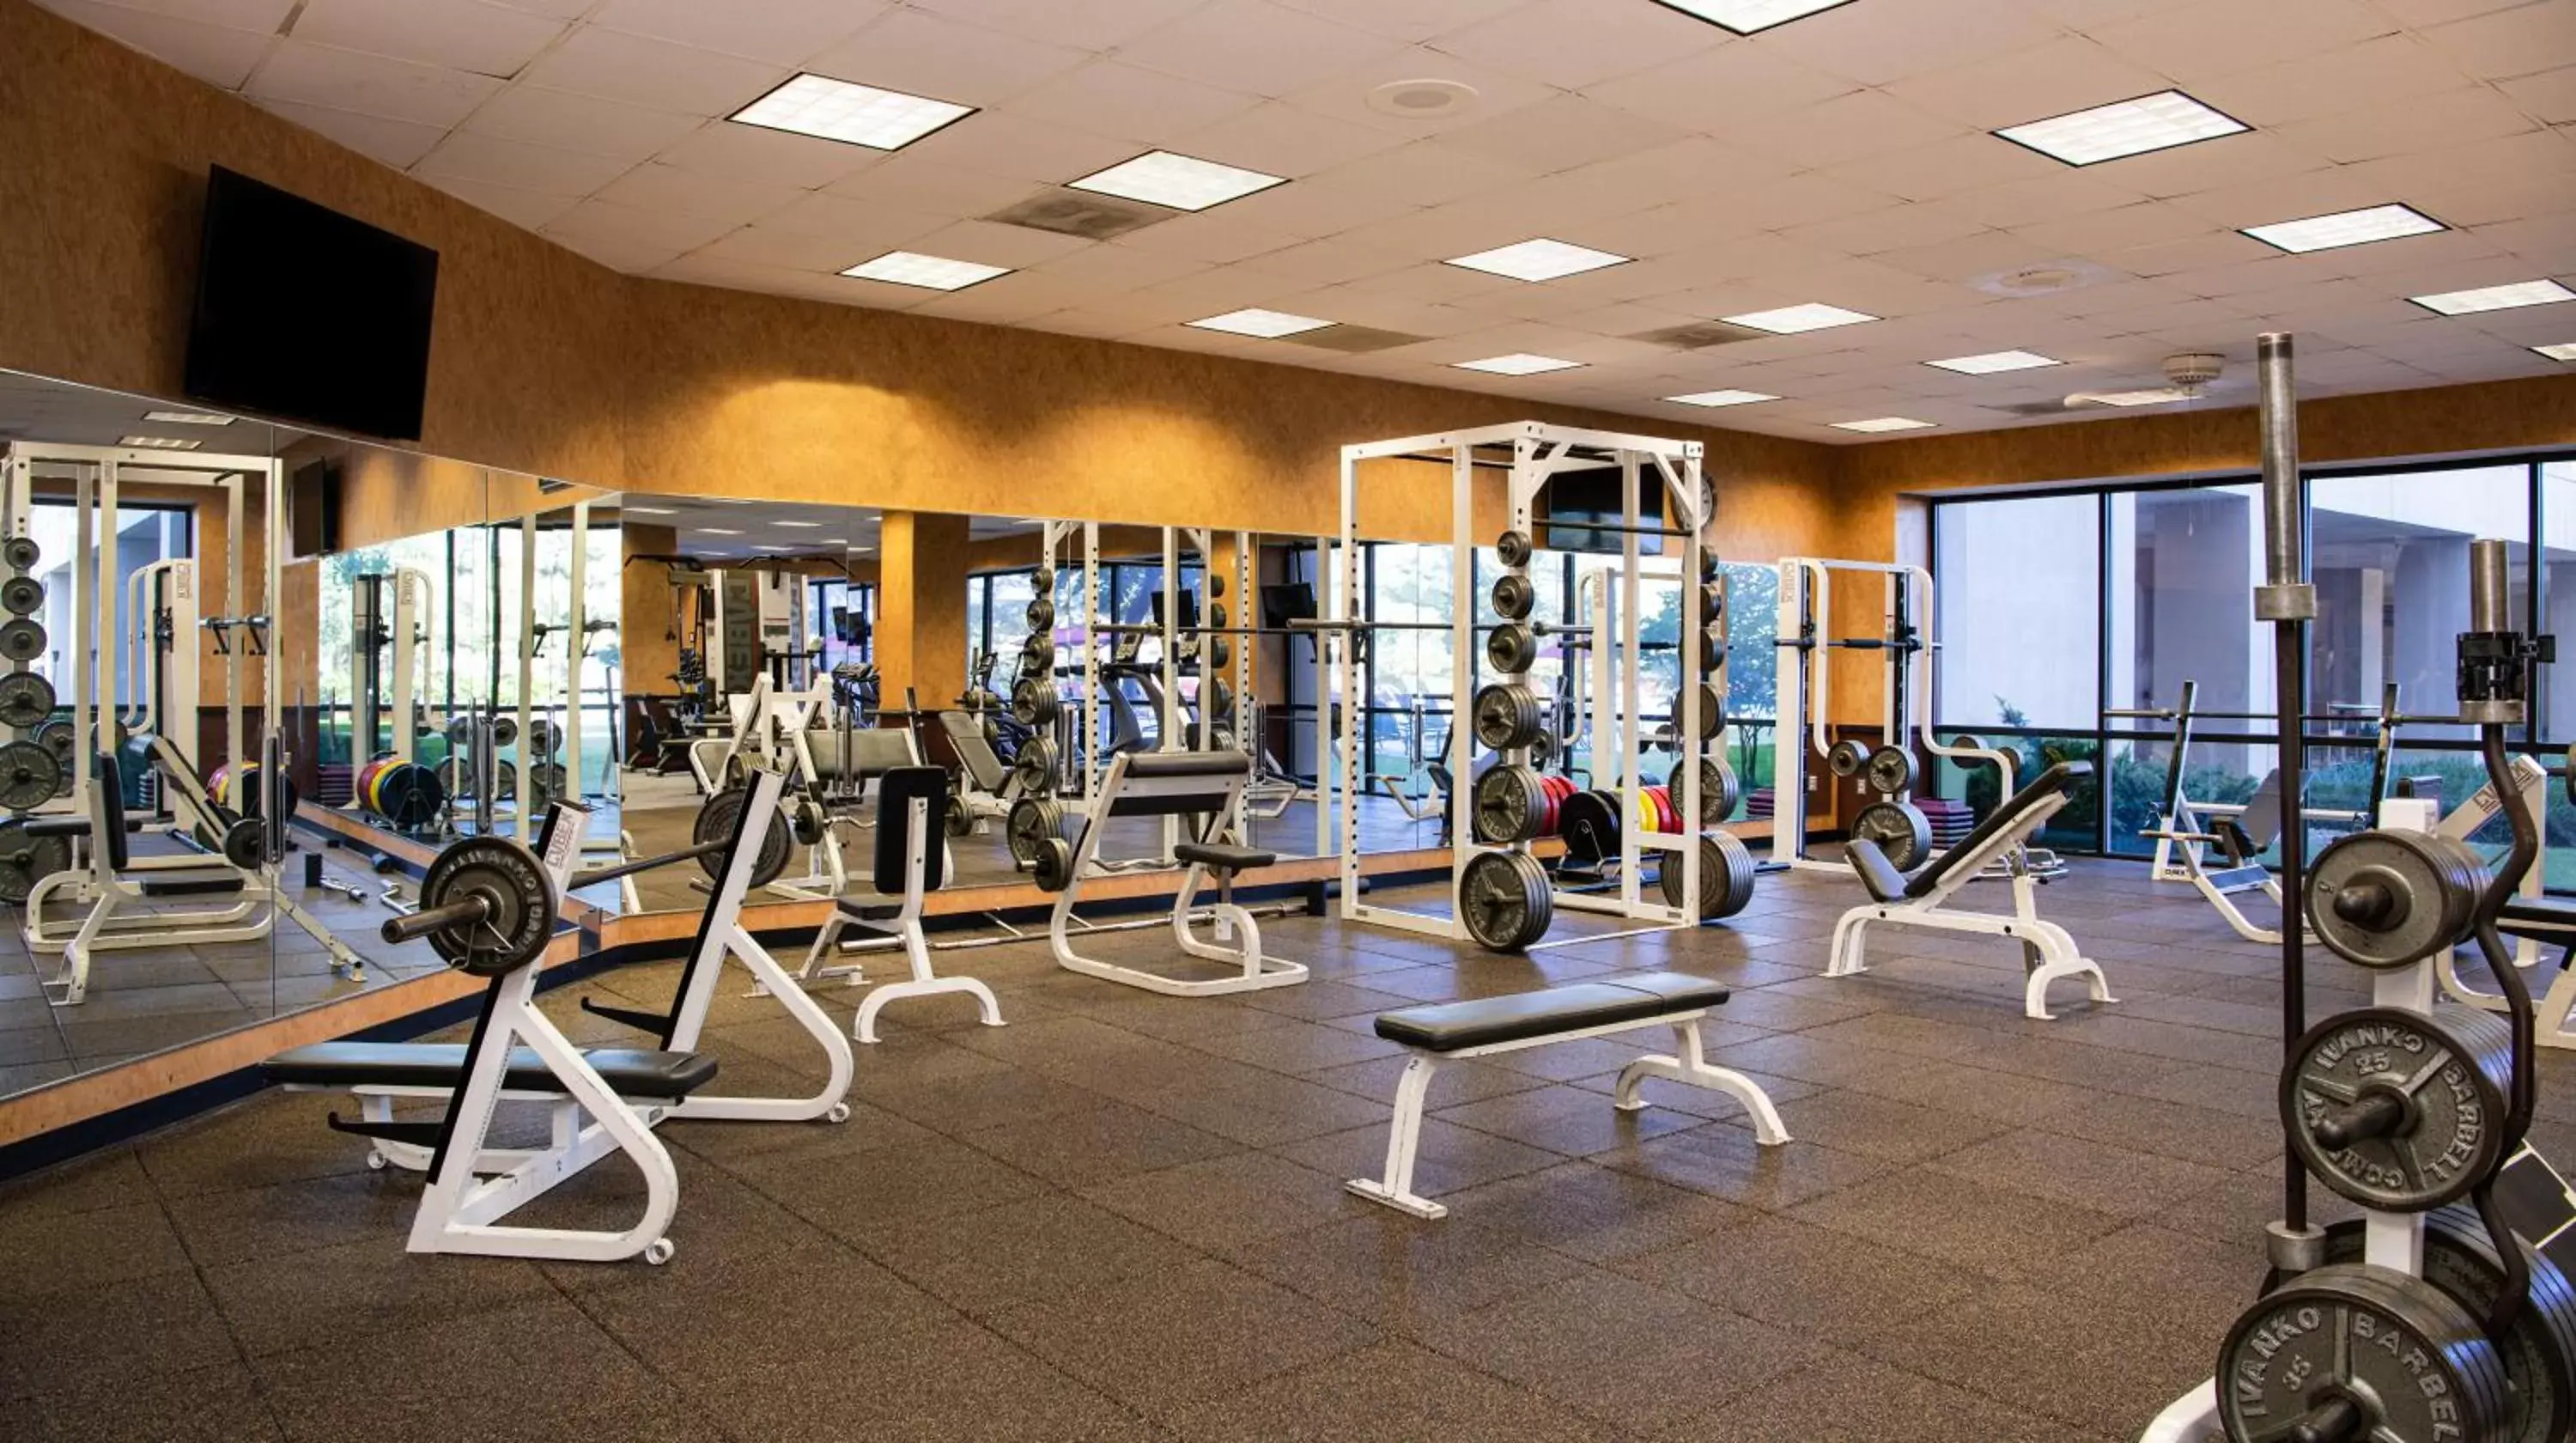 Fitness centre/facilities, Fitness Center/Facilities in NCED Conference Center & Hotel